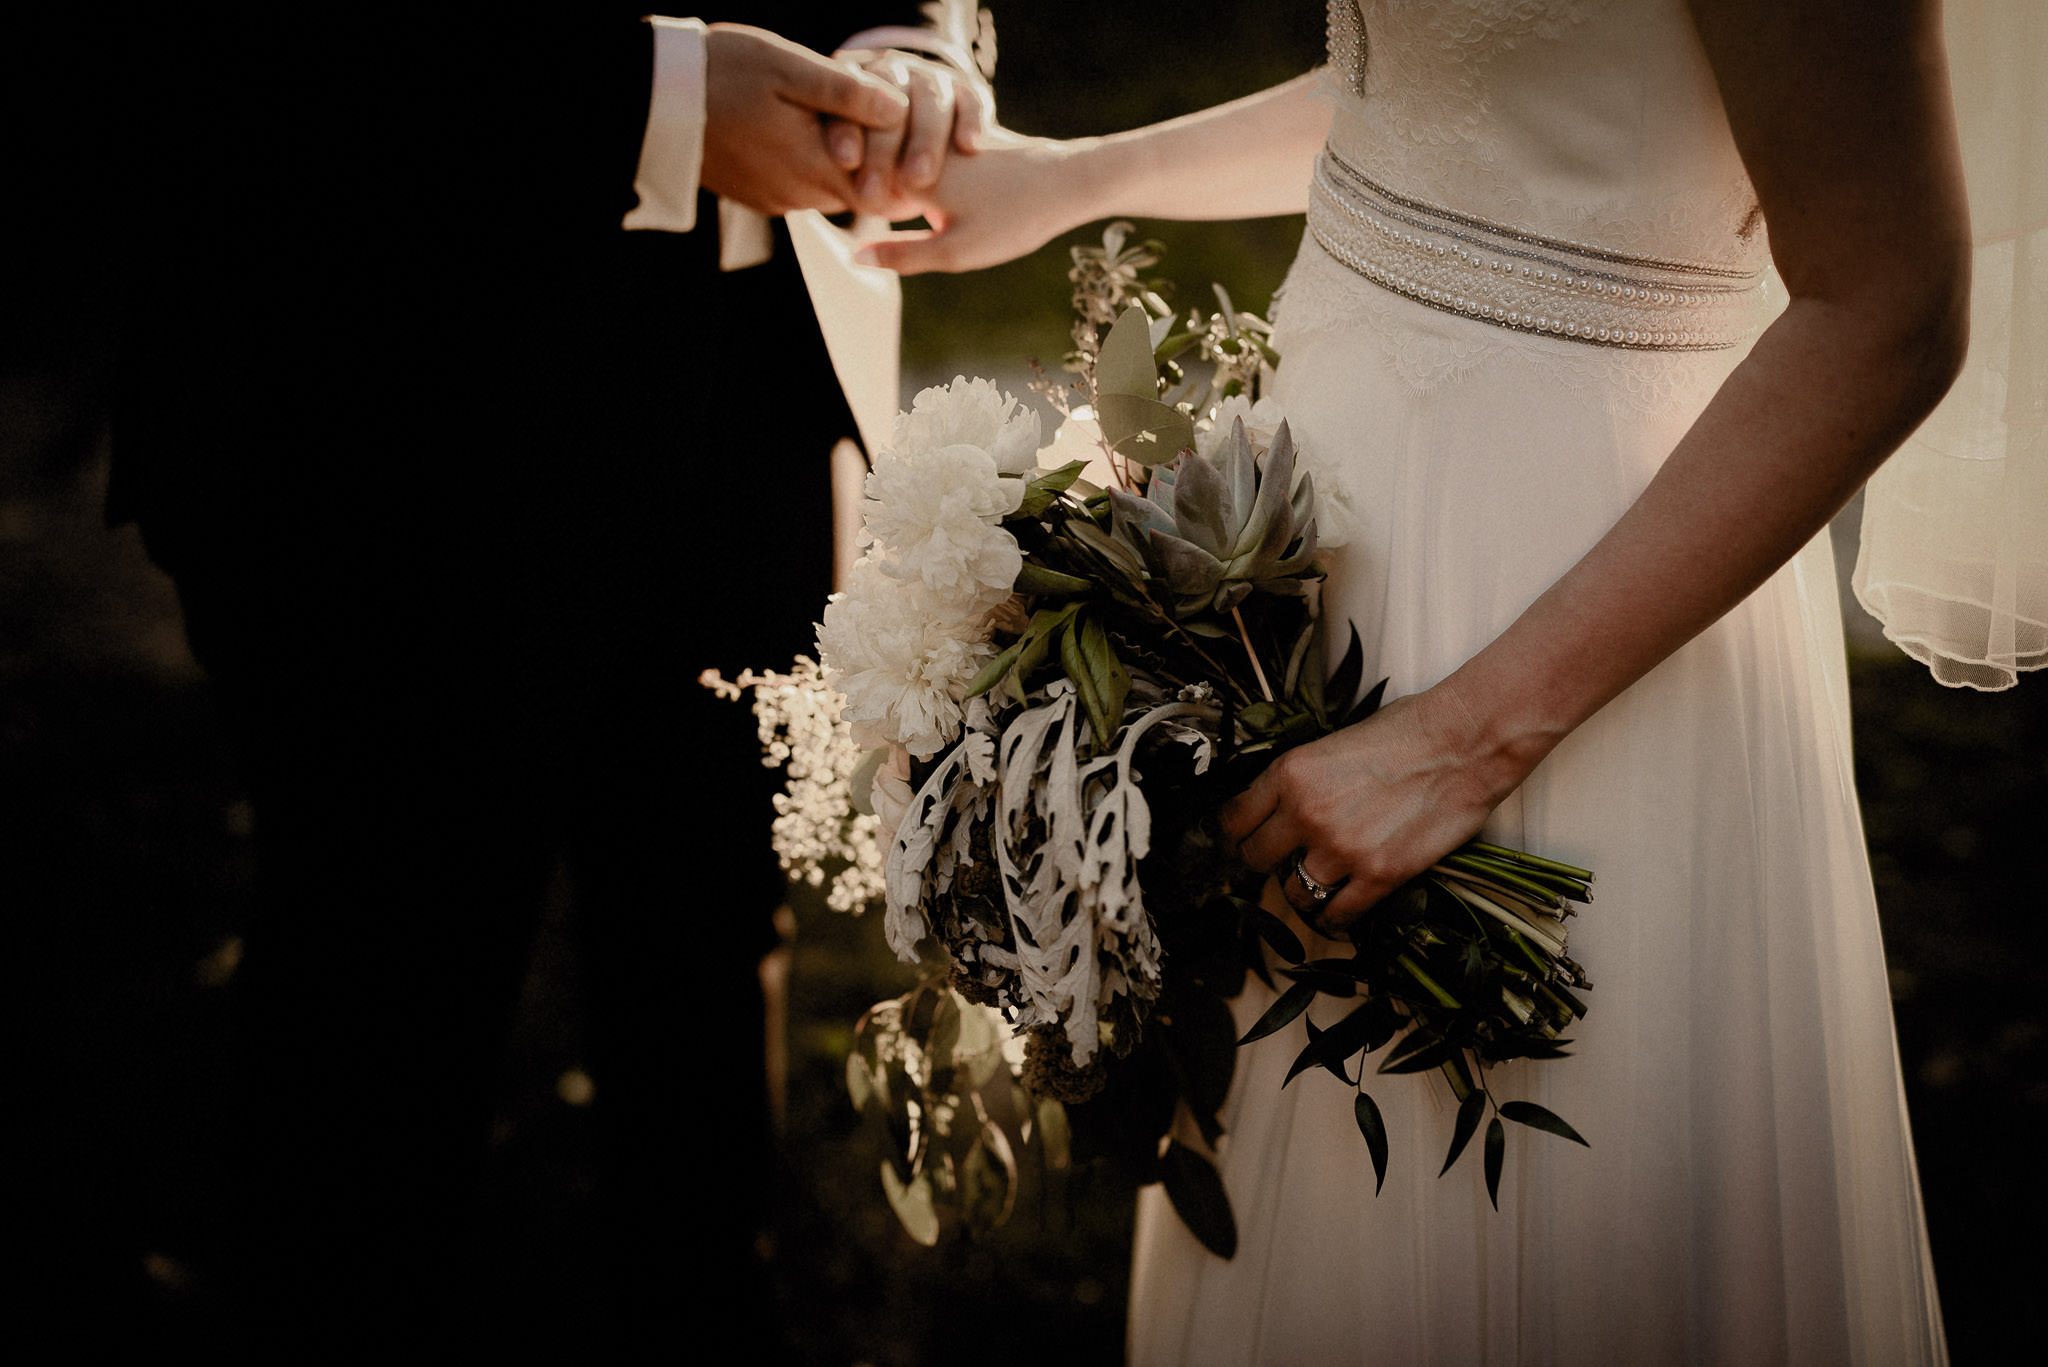 intimate wedding details showing the bridal bouquet